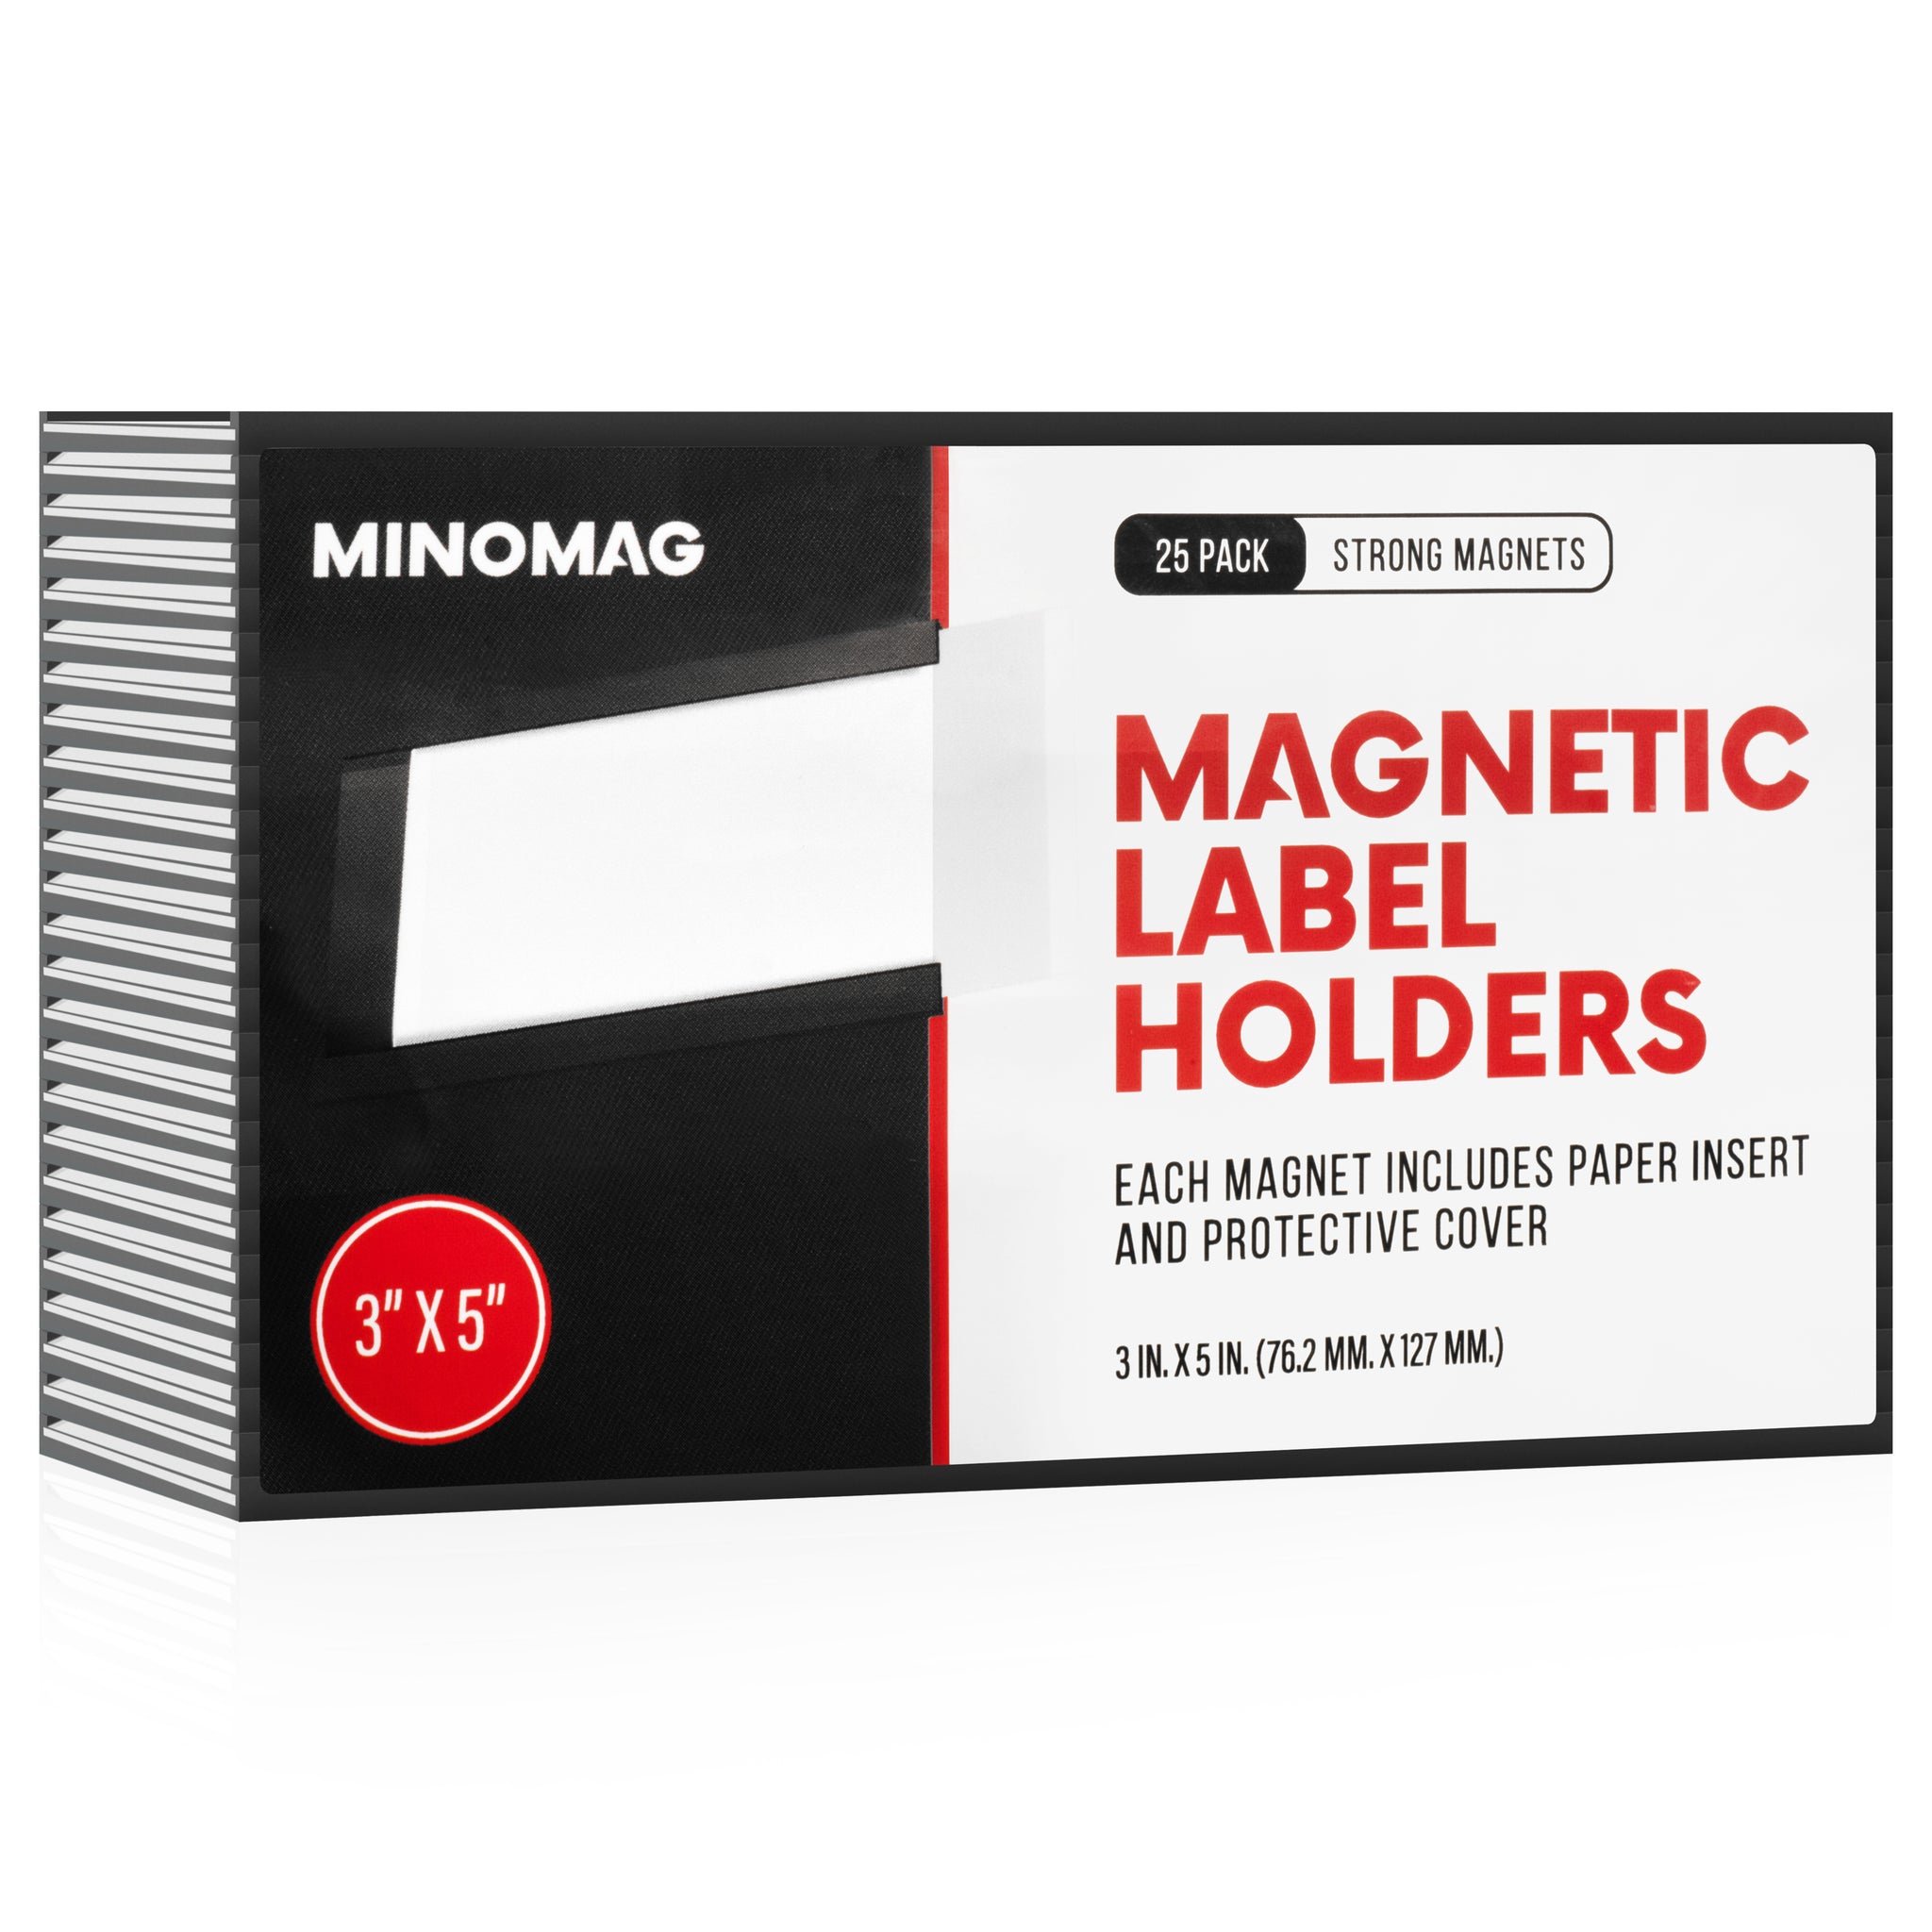 Business Card Magnets  3.5in.x2in. (Box of 200) – Minomag